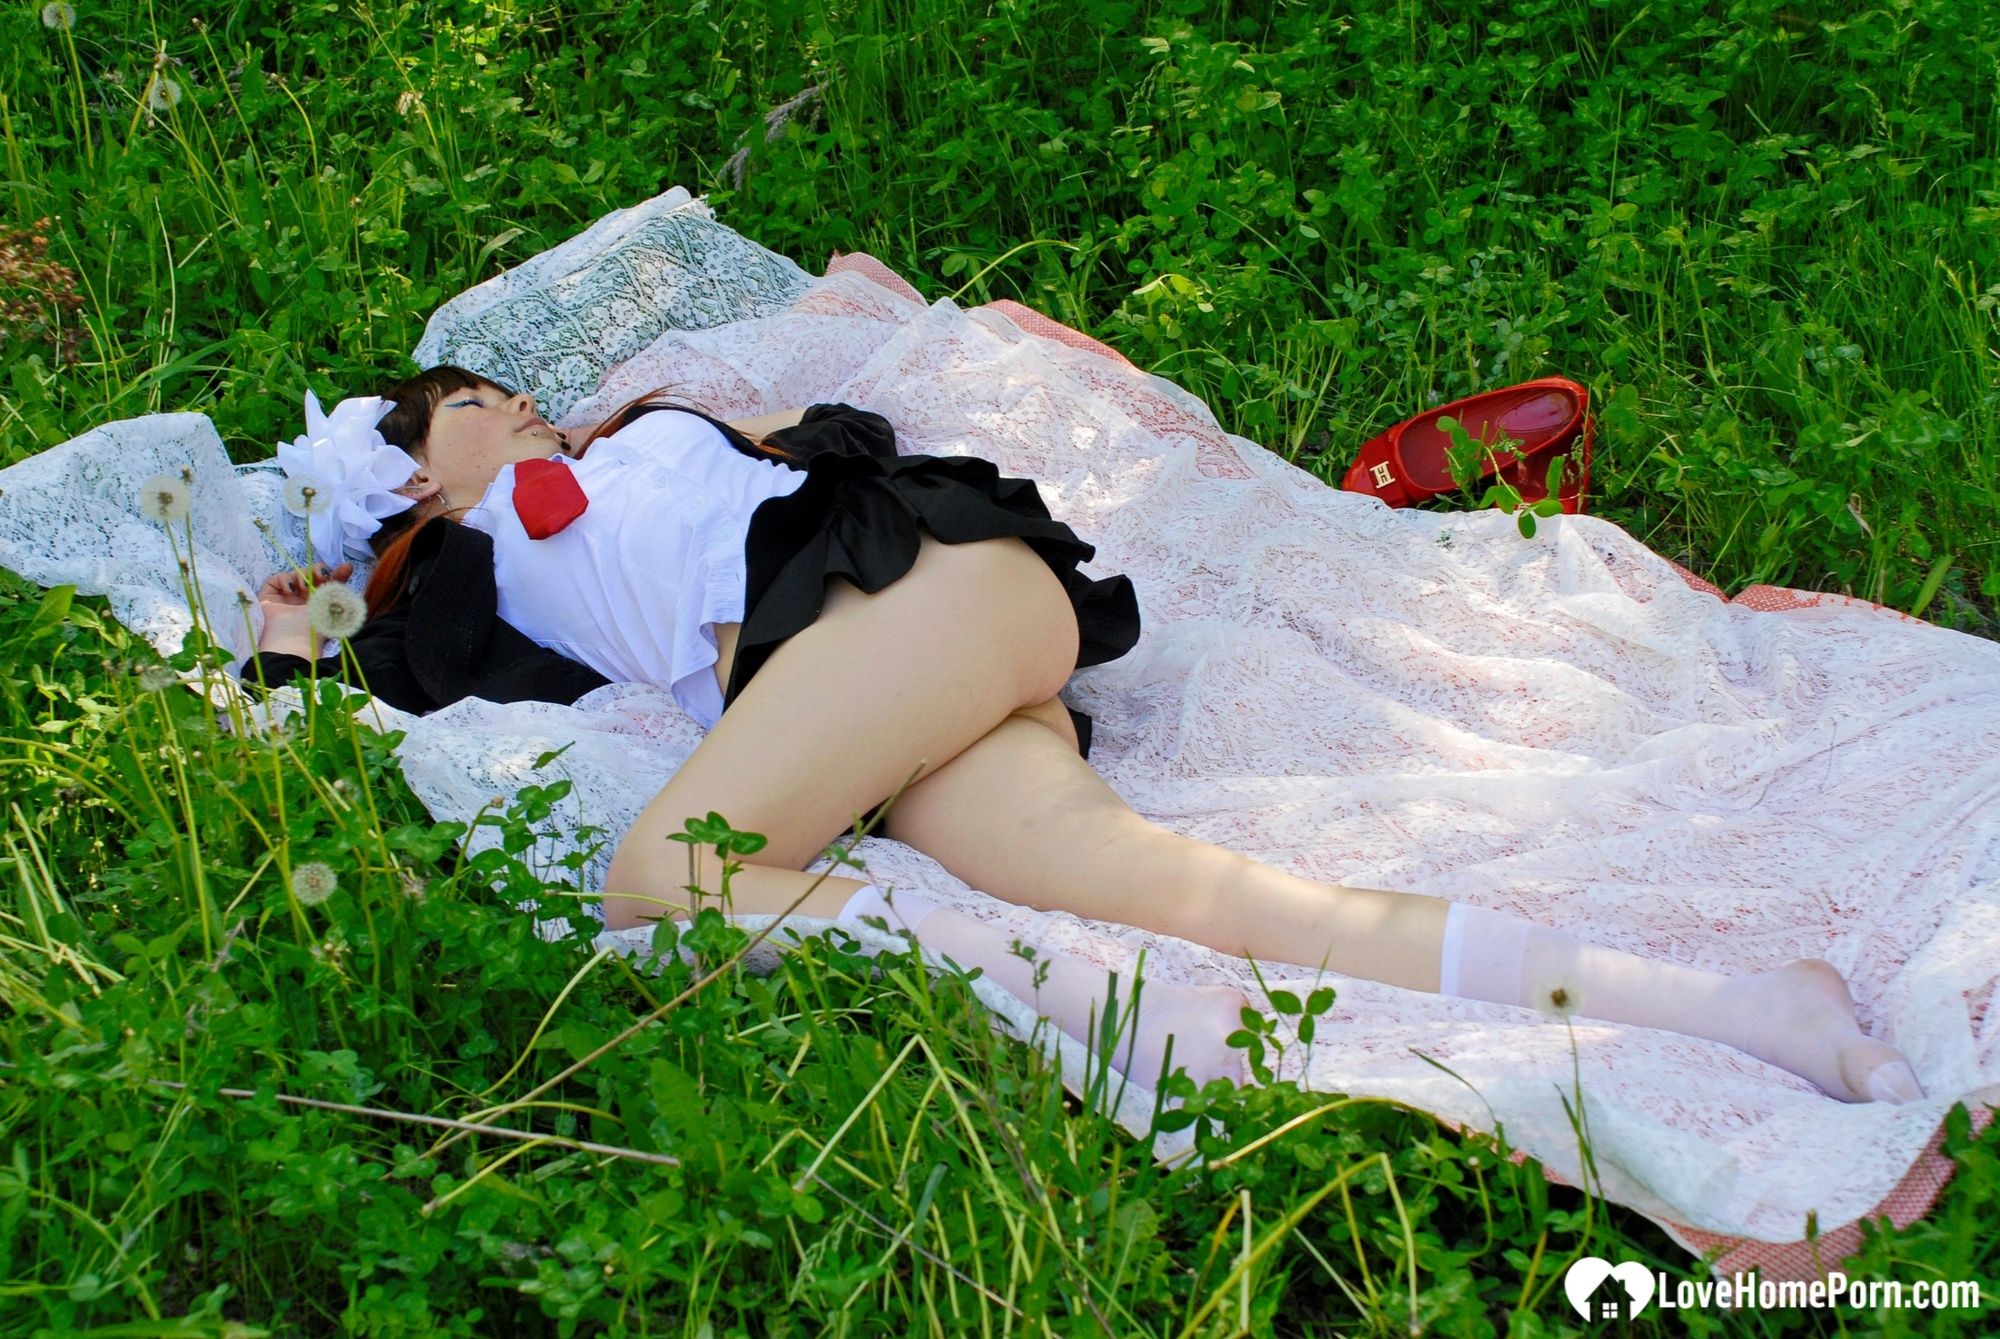 Schoolgirl turns a picnic into a teasing session #12